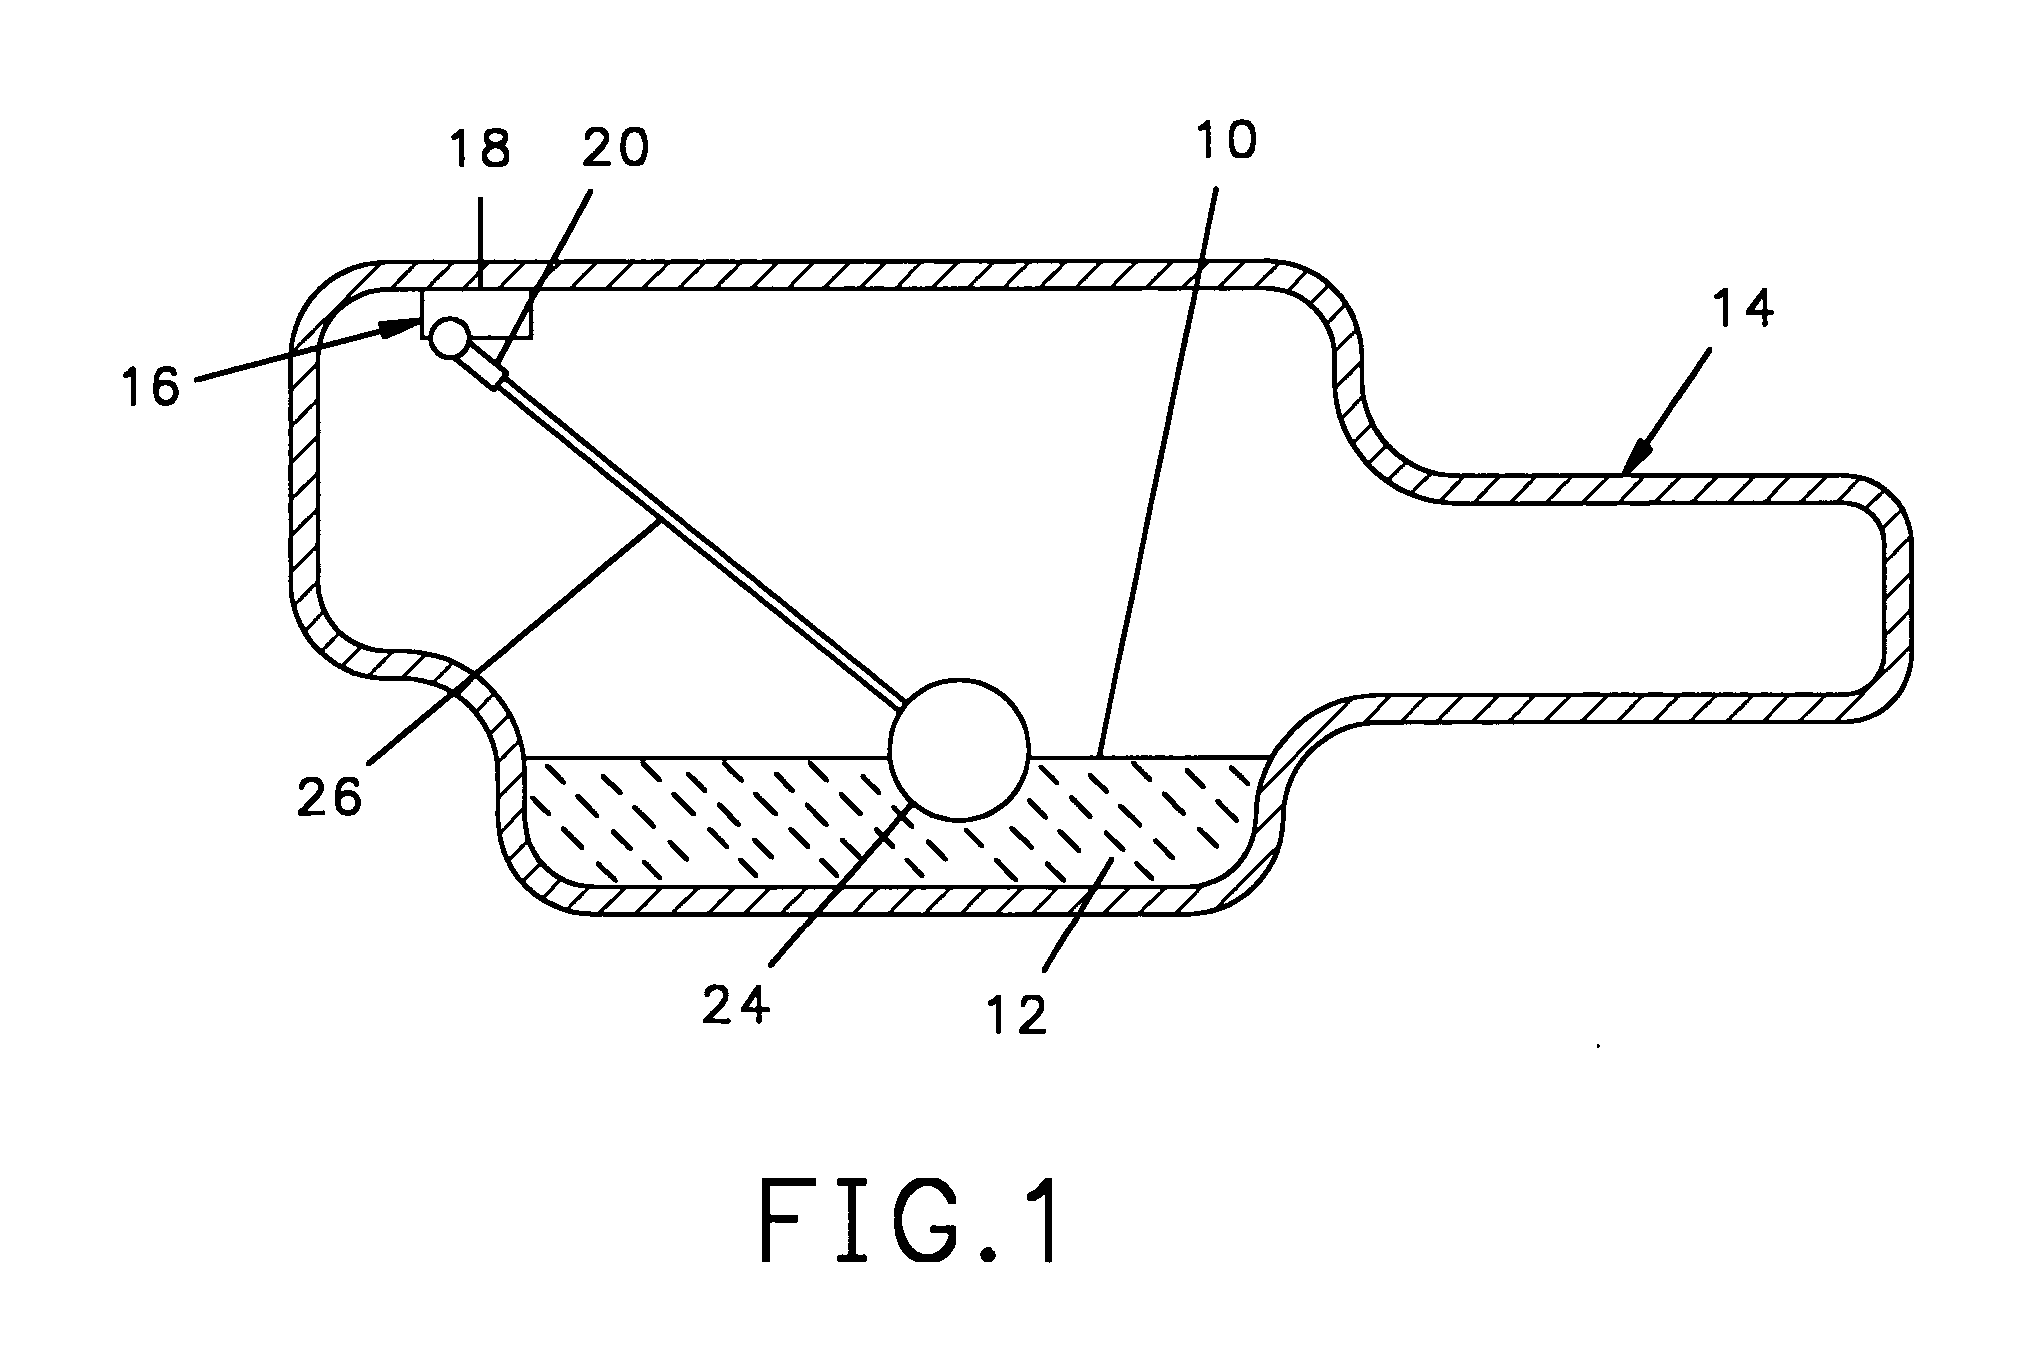 Device employing magnetic flux to measure the level of fluid in a tank